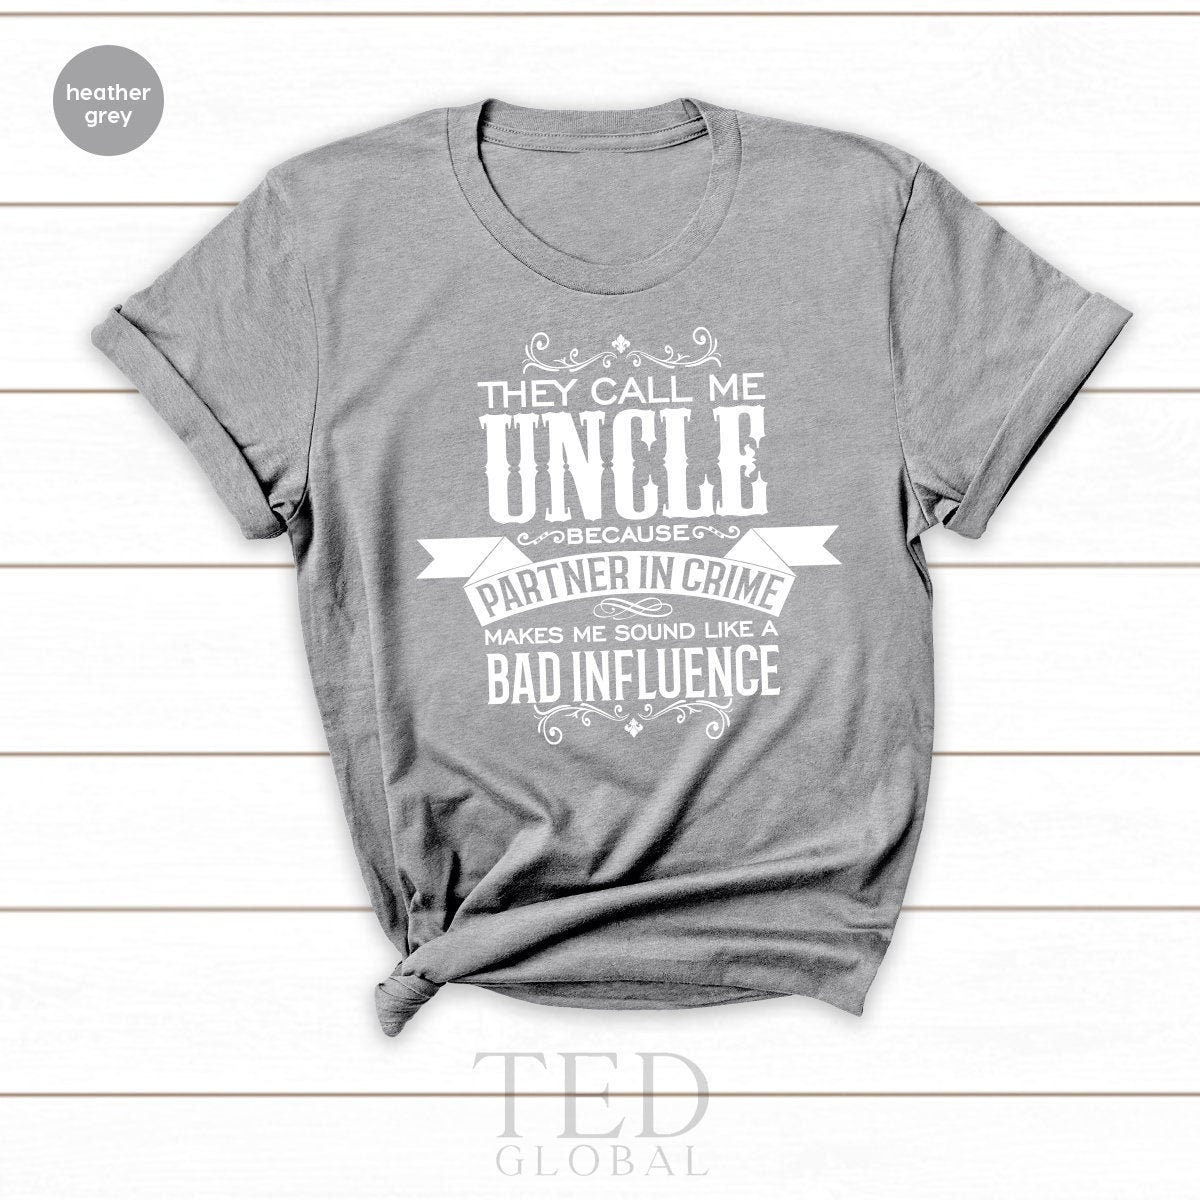 Uncle Shirt, New Uncle T-Shirts, Gifts for Uncle, They Call Me Uncle Because Partner In Crime Uncle T-Shirts, Uncle Gift, Gift for Uncle - Fastdeliverytees.com